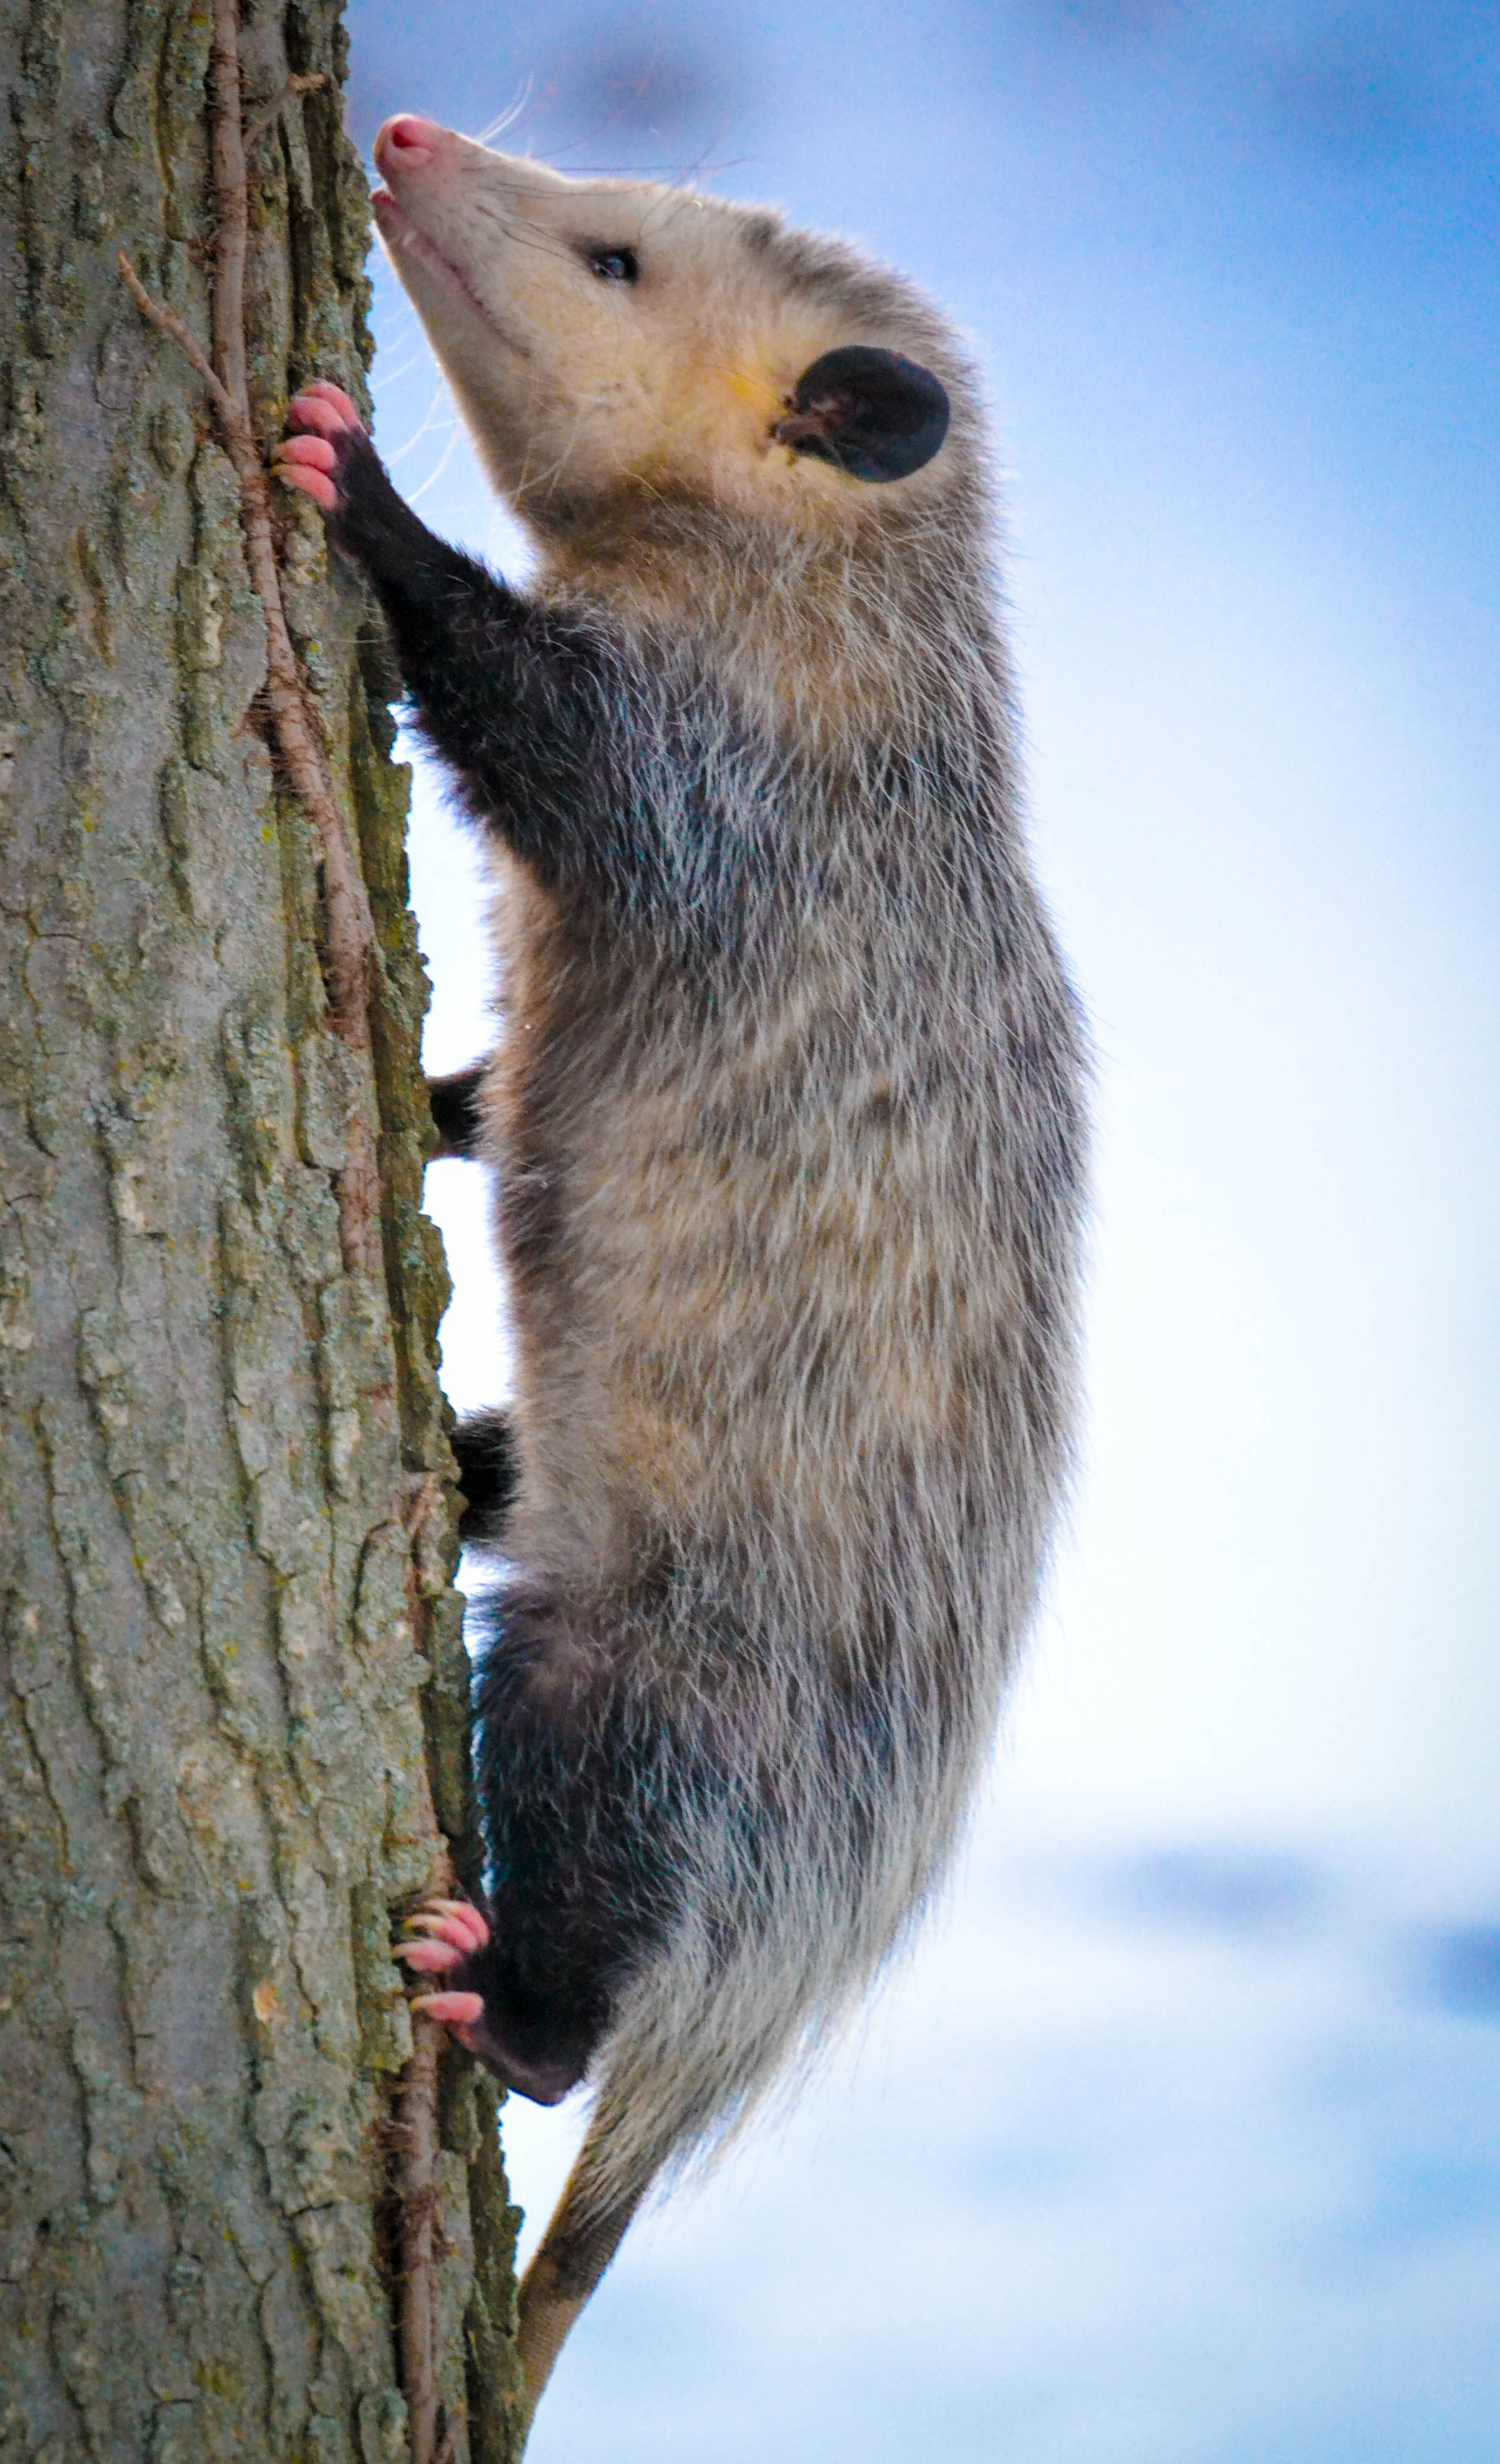   An opossum climbs straight up on a tree. These critters are excellent night-time predators. Photo by Andrew Cannizzaro  